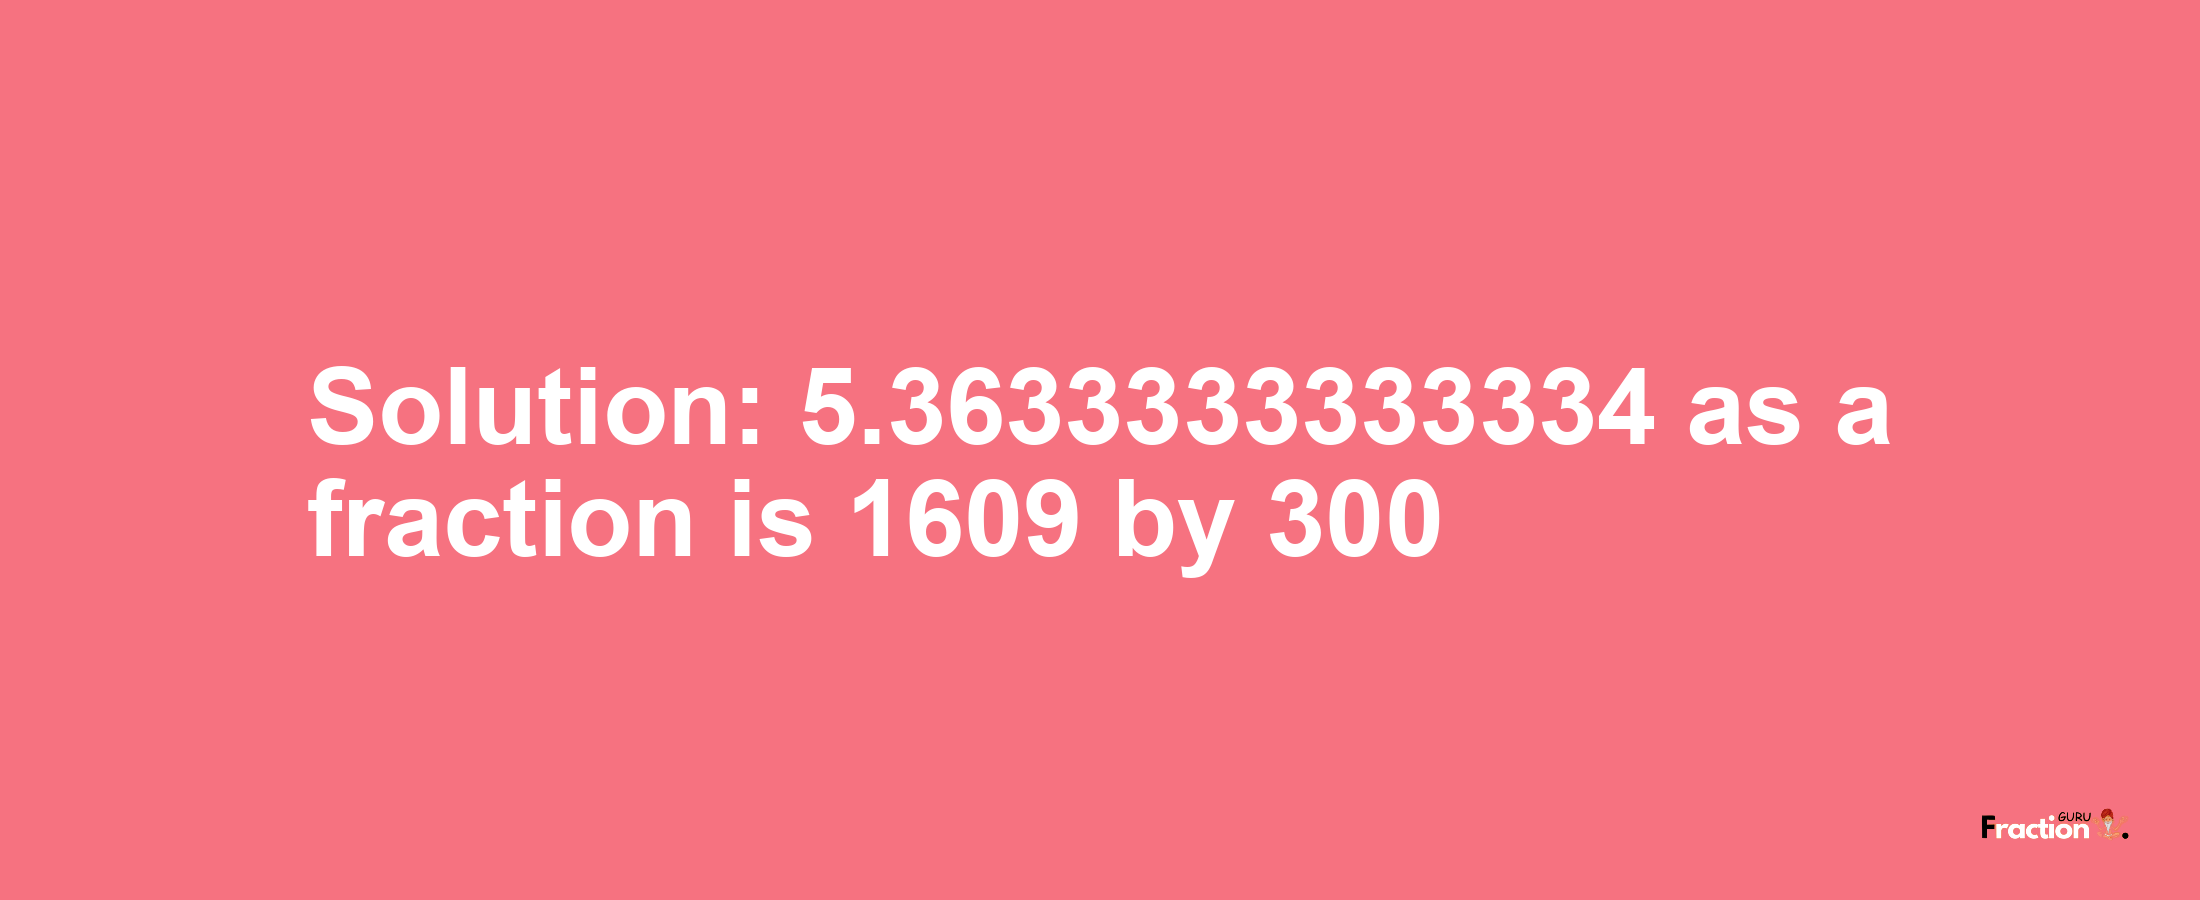 Solution:5.3633333333334 as a fraction is 1609/300